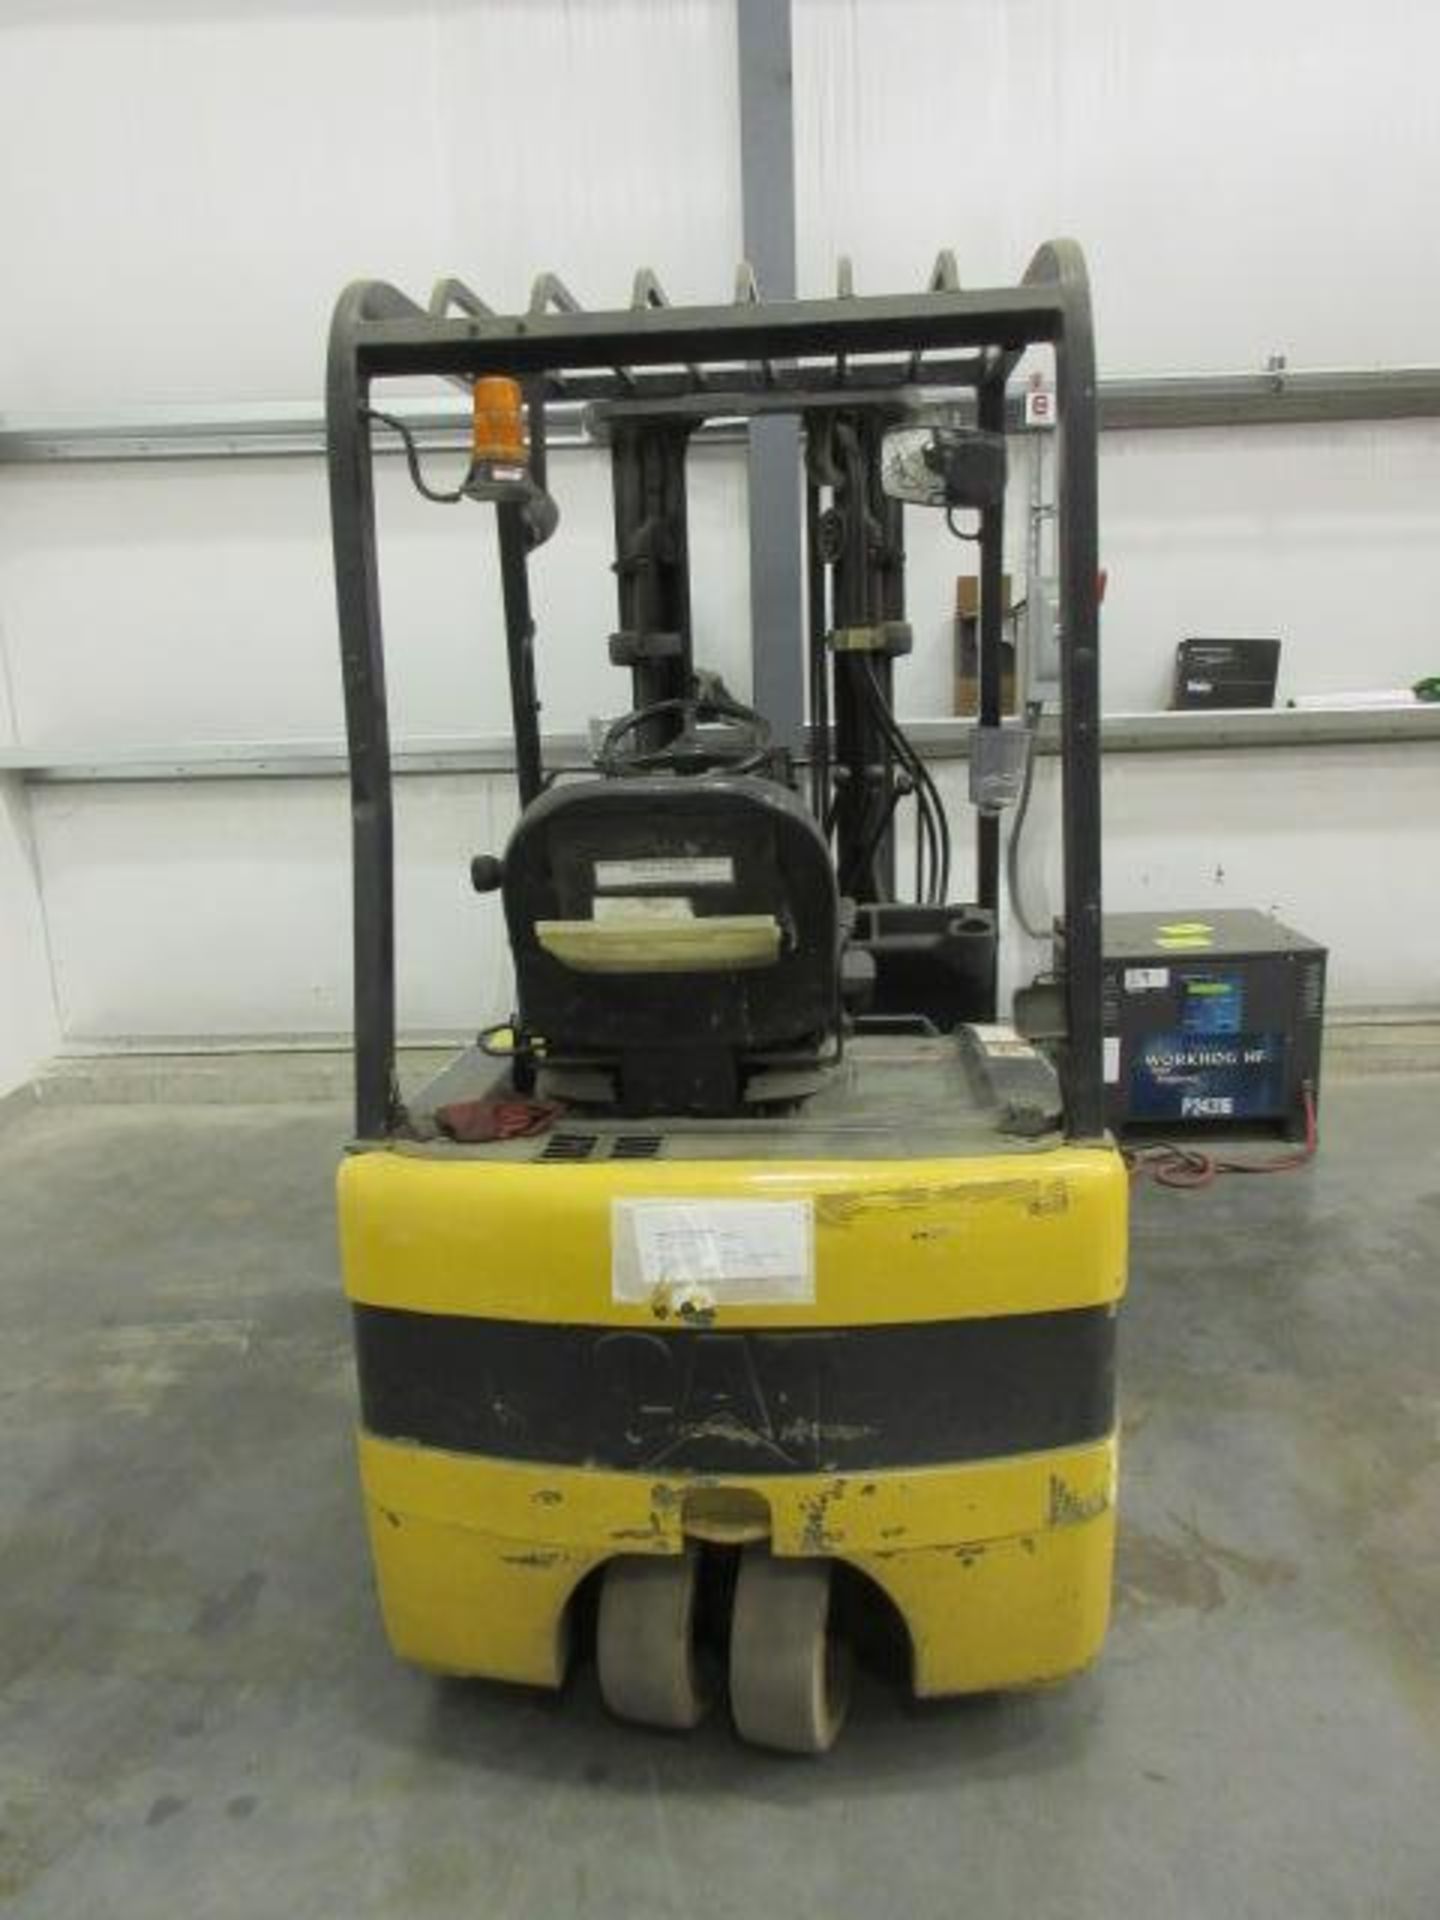 CAT 3-Wheel Electric Forklift - Image 4 of 6